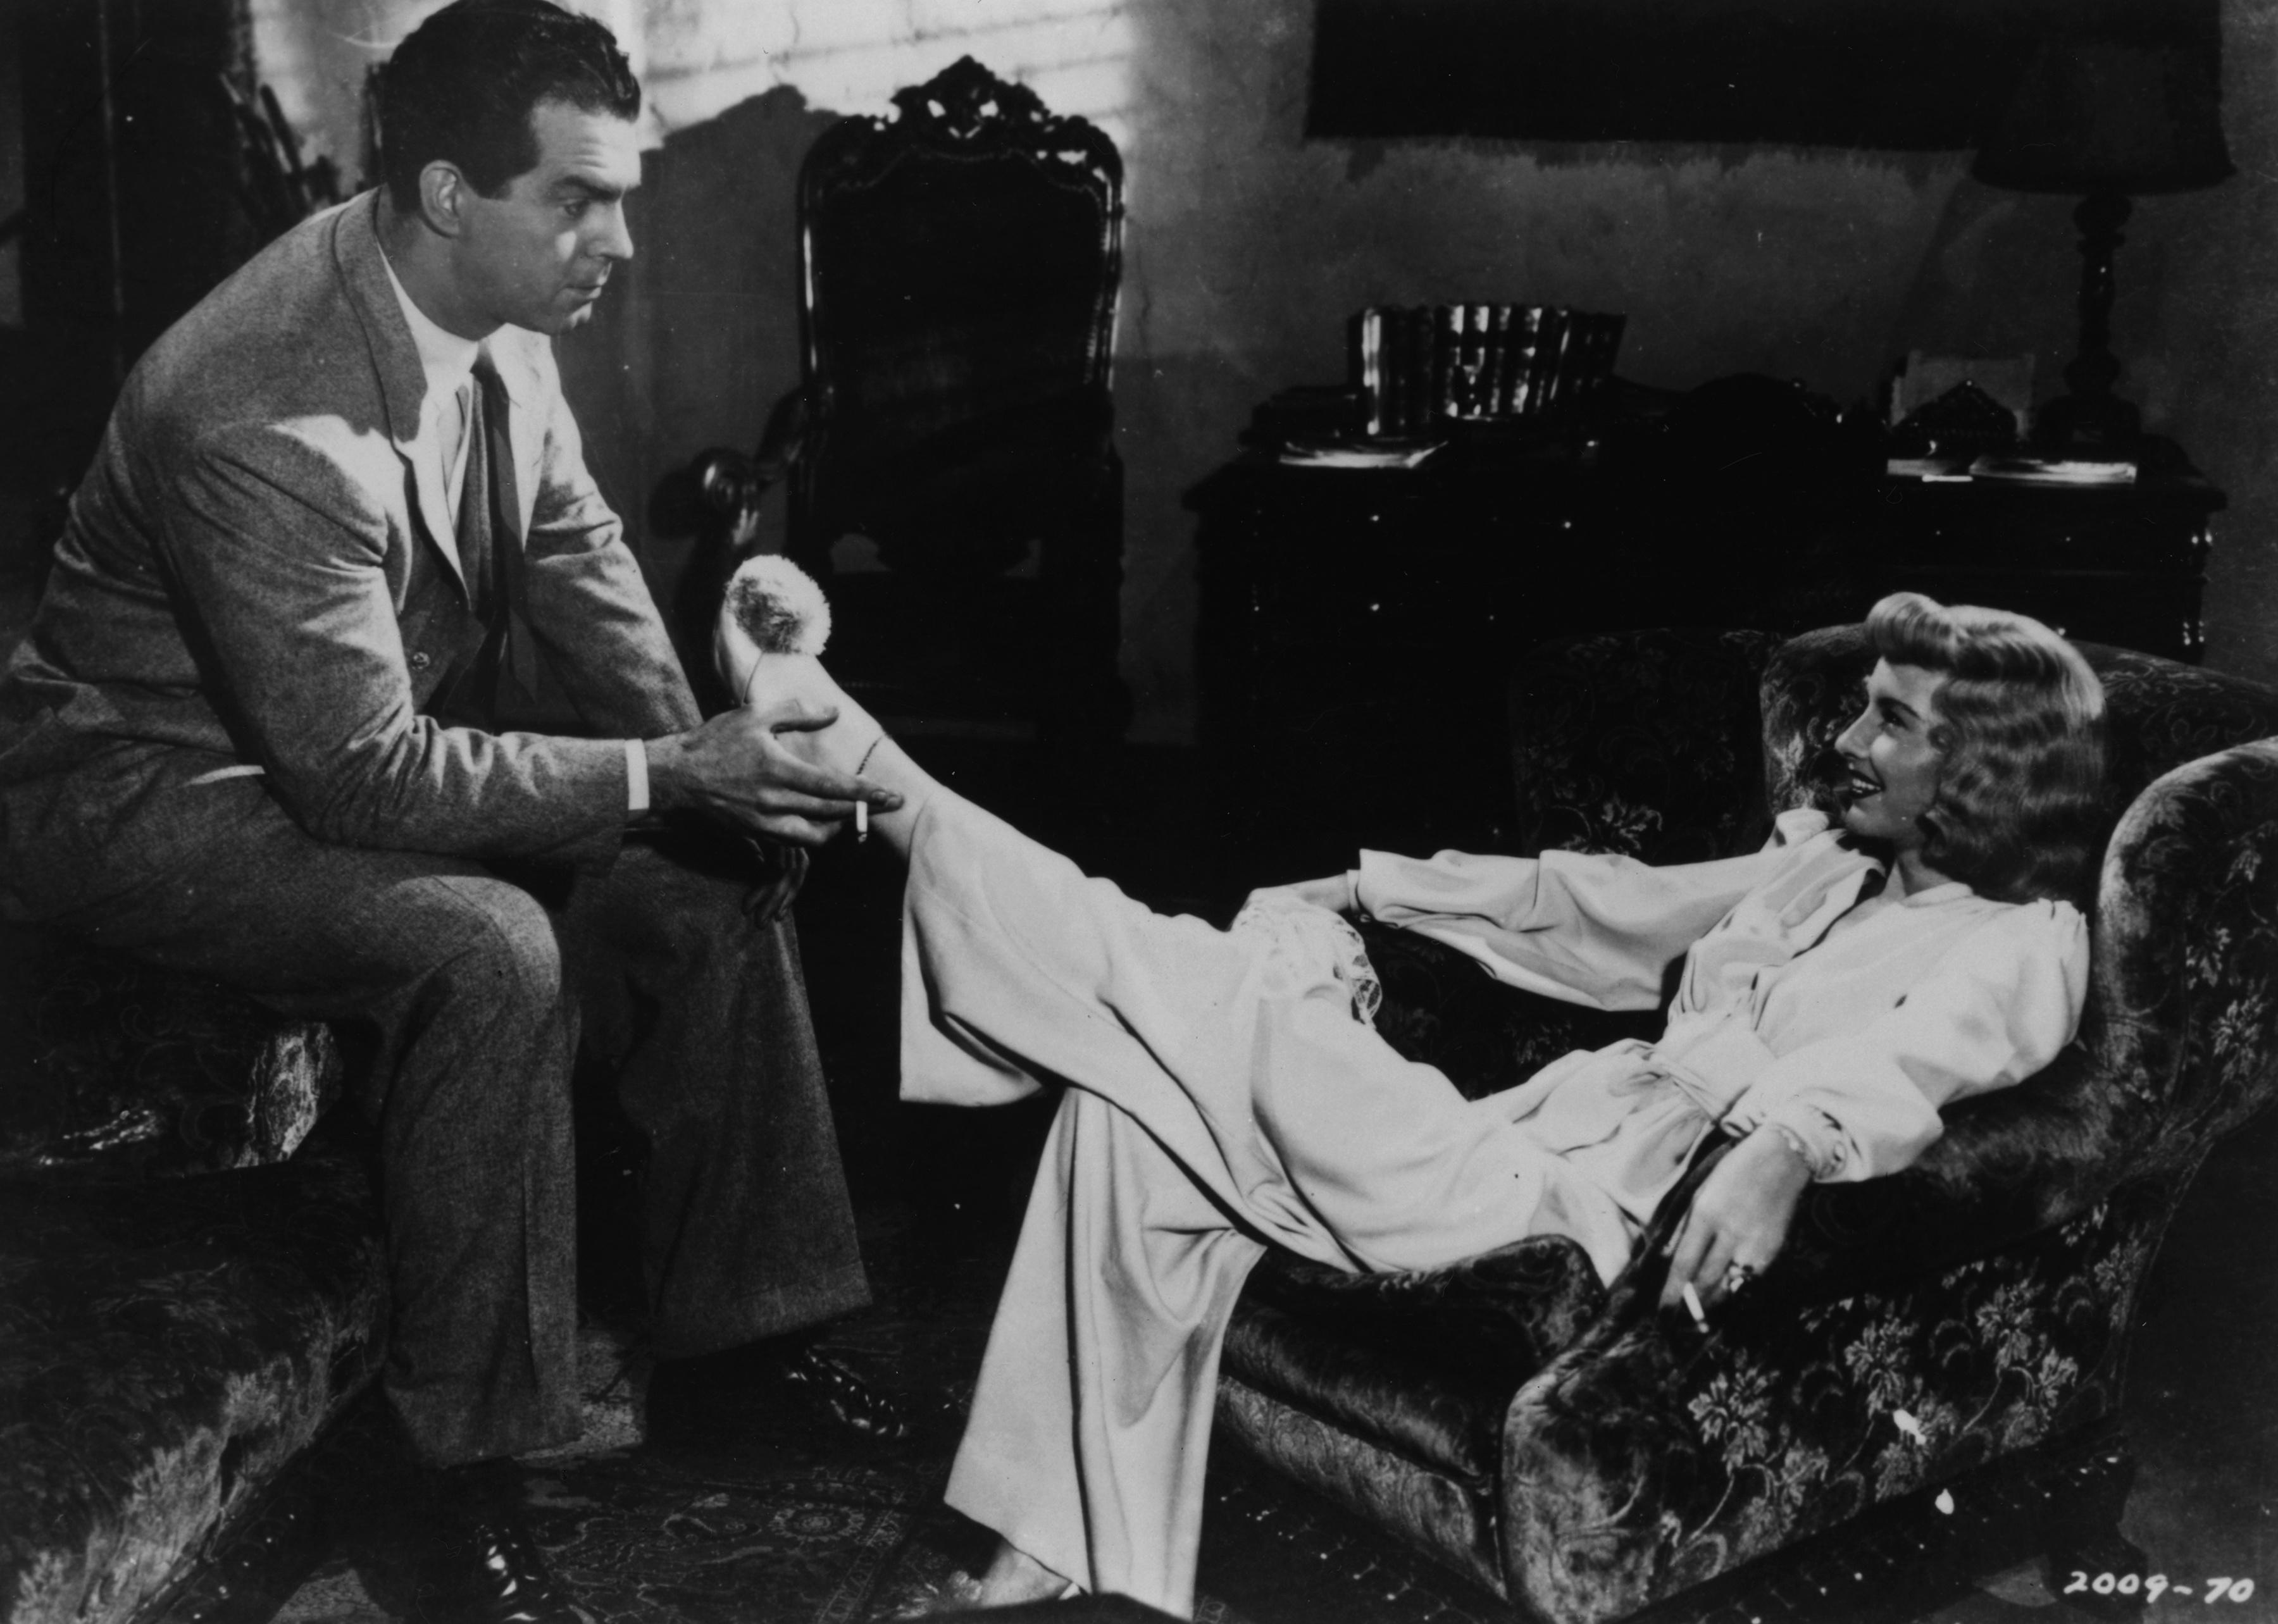 A man smoking a cigarette and holding up a woman's foot while she lounges in a chair.